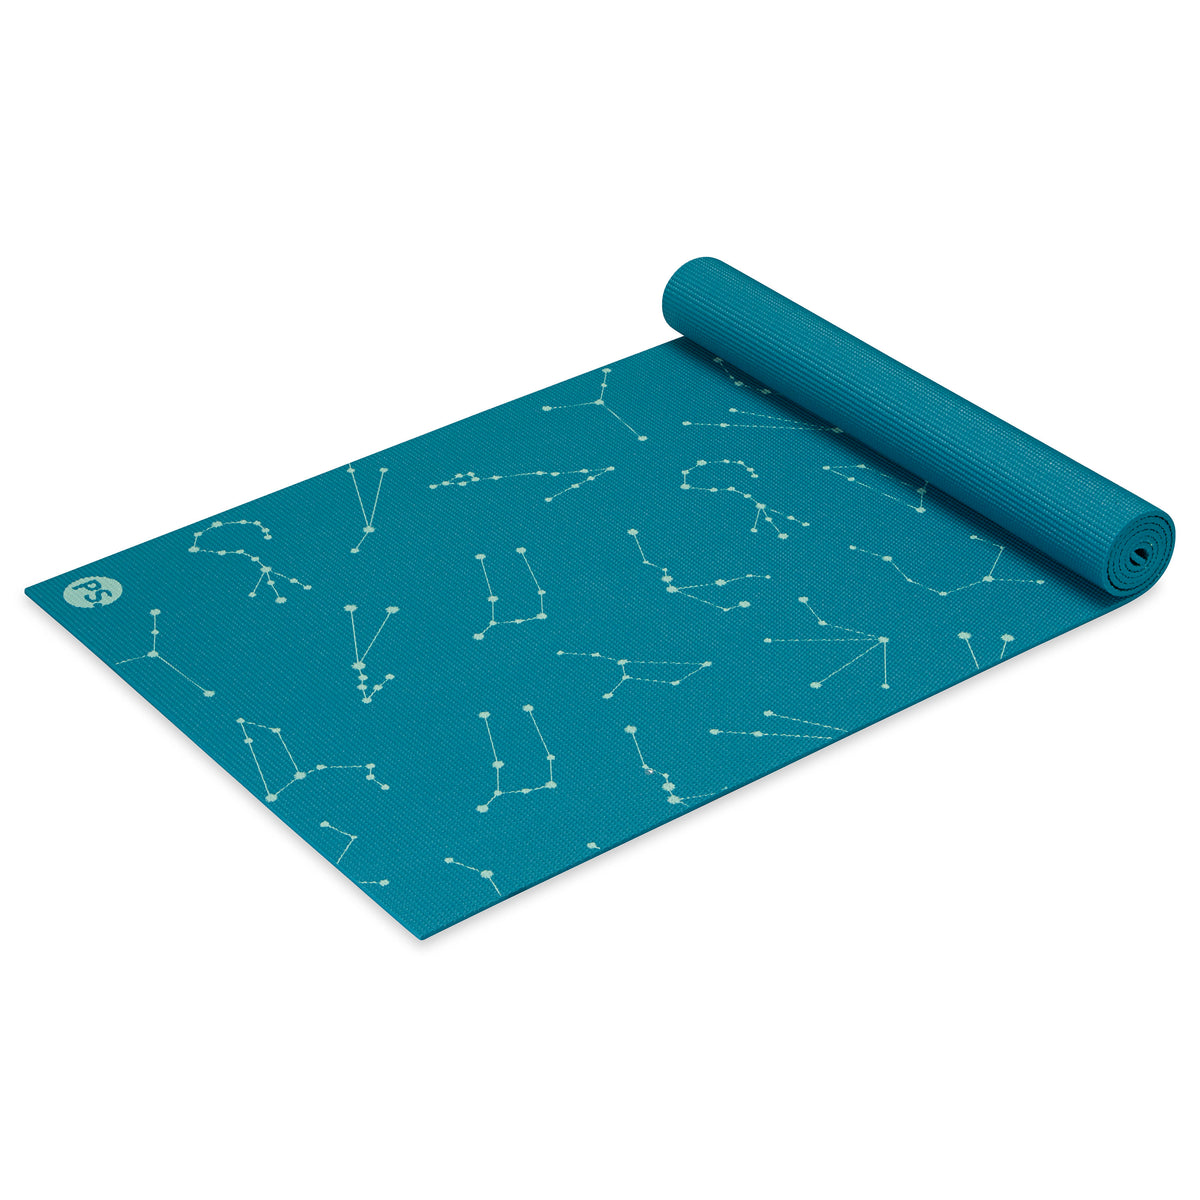 Gaiam Yoga Mat Premium Print Reversible Extra Thick Non Slip Exercise &  Fitness Mat for All Types of Yoga, Pilates & Floor Workouts, Seaglass, 6mm